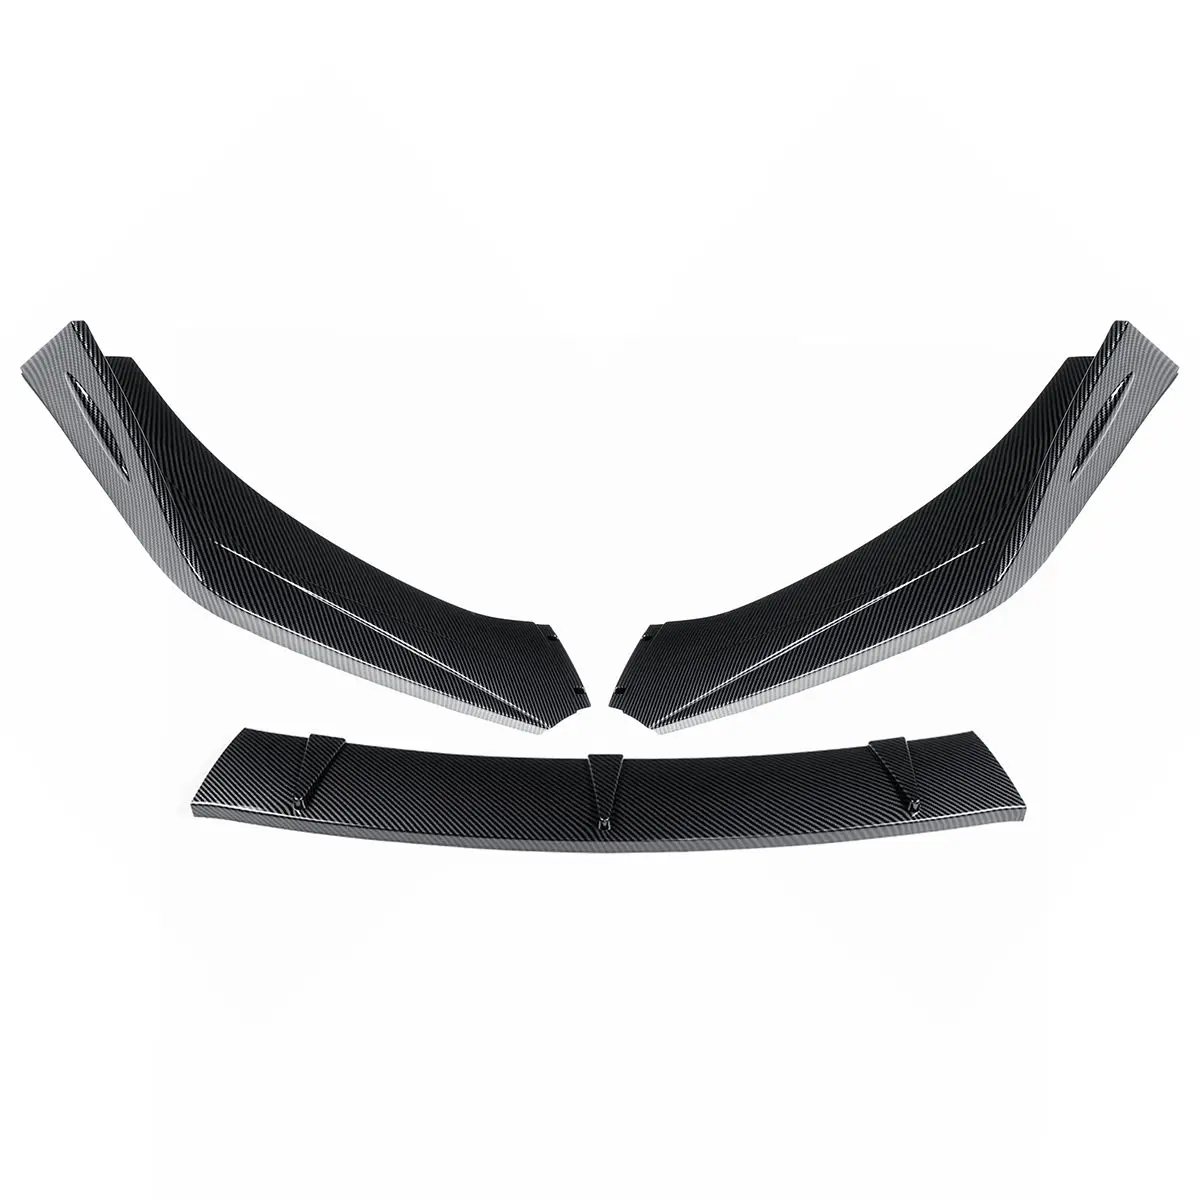 New Universal Car Front Bumper Splitter Lip Body Kit Spoiler Diffuser For Audi A5 Sline S5 RS5 09-16 For BMW For Benz For Mazad